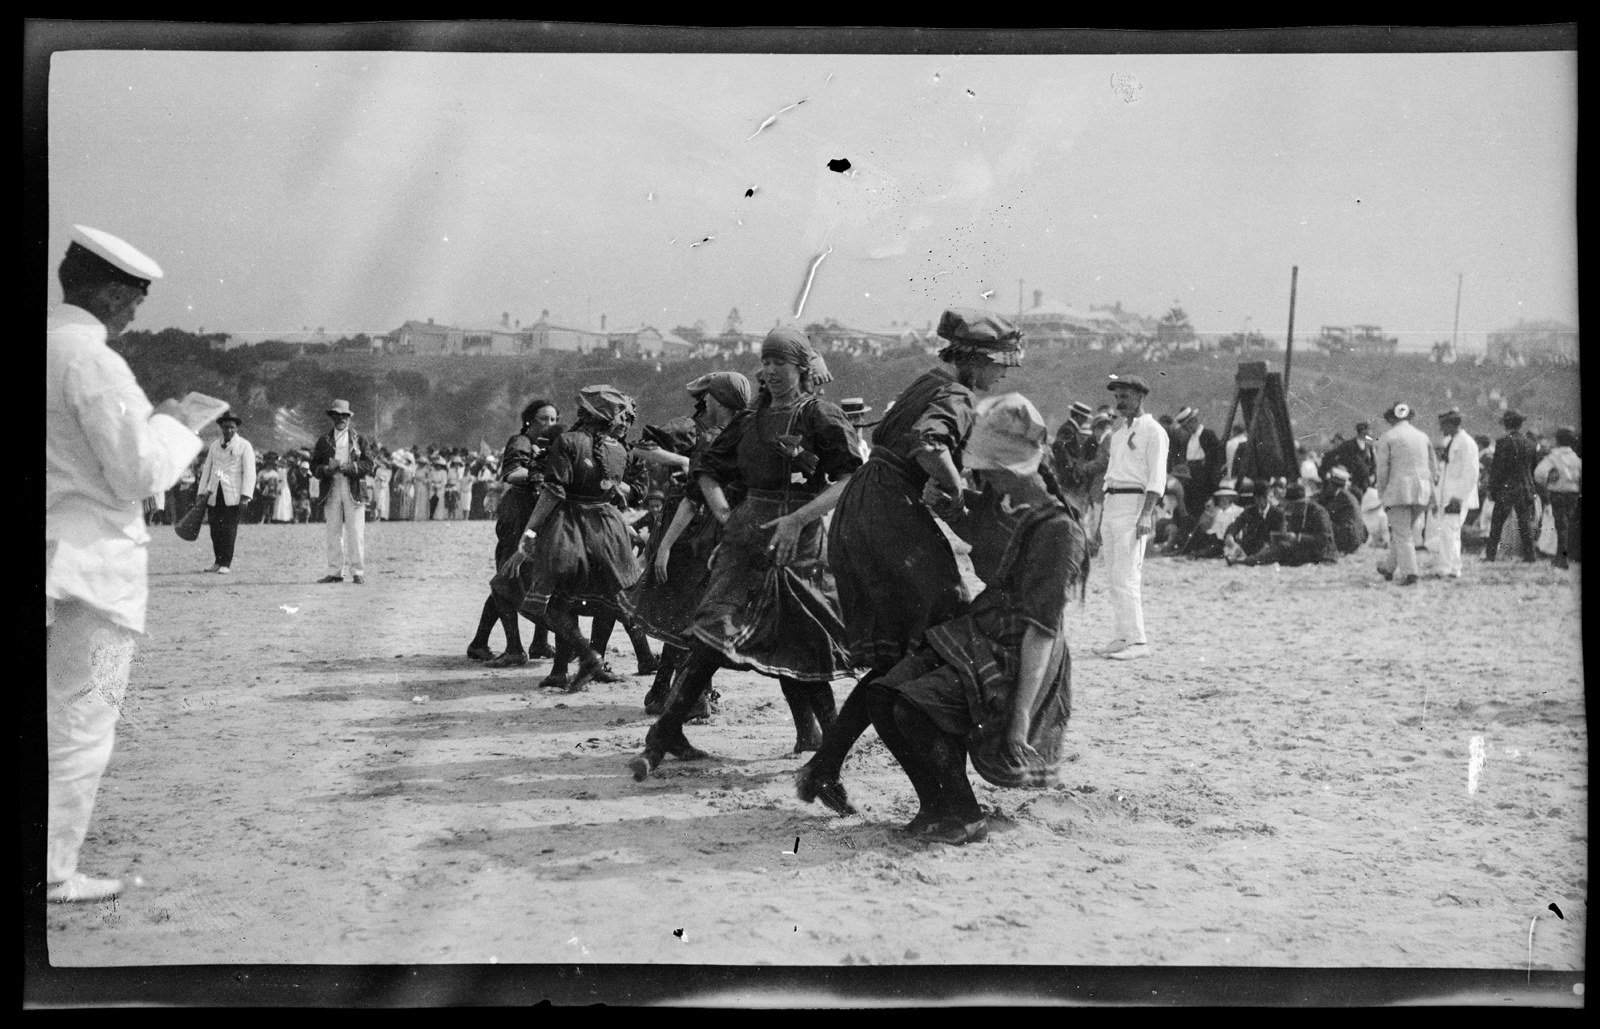 Girls from the Wollongong Ladies Life Saving Club rising after land drill, photo by Robert Barnet, January 1914